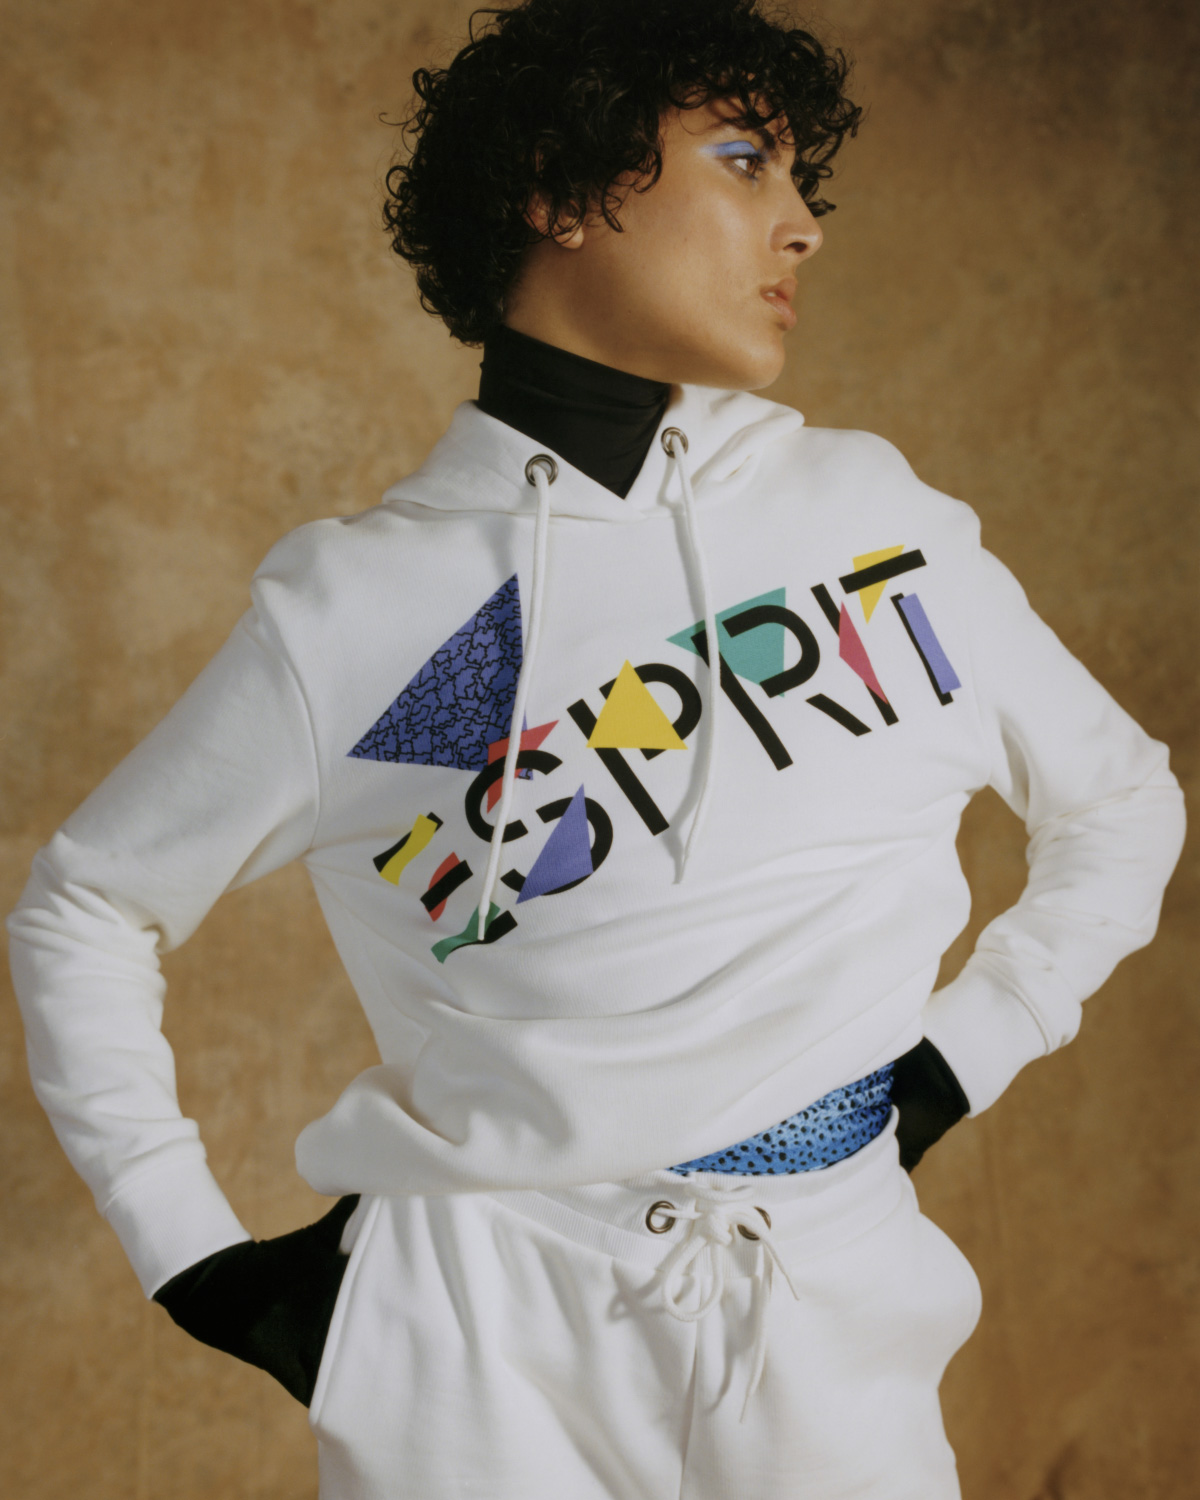 esprit championed inclusivity conscious style long everyone else heres